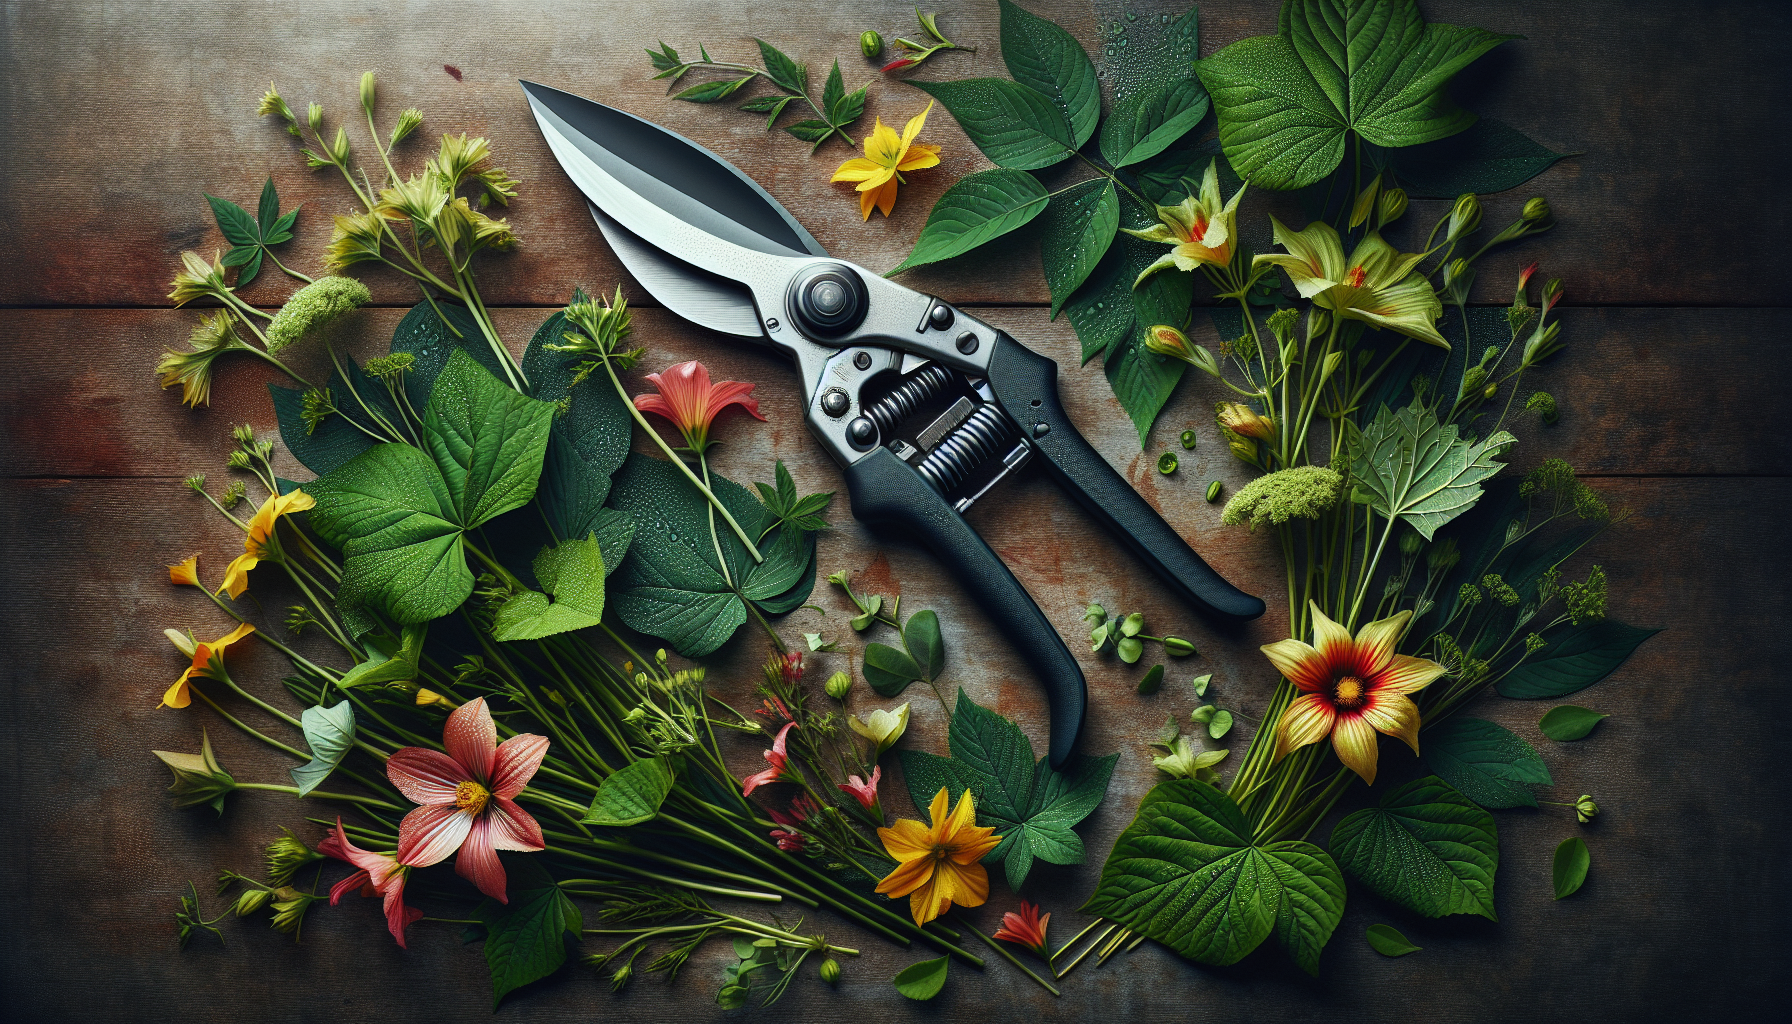 Which Gardening Tool Is Most Useful In Cutting And Clearing?